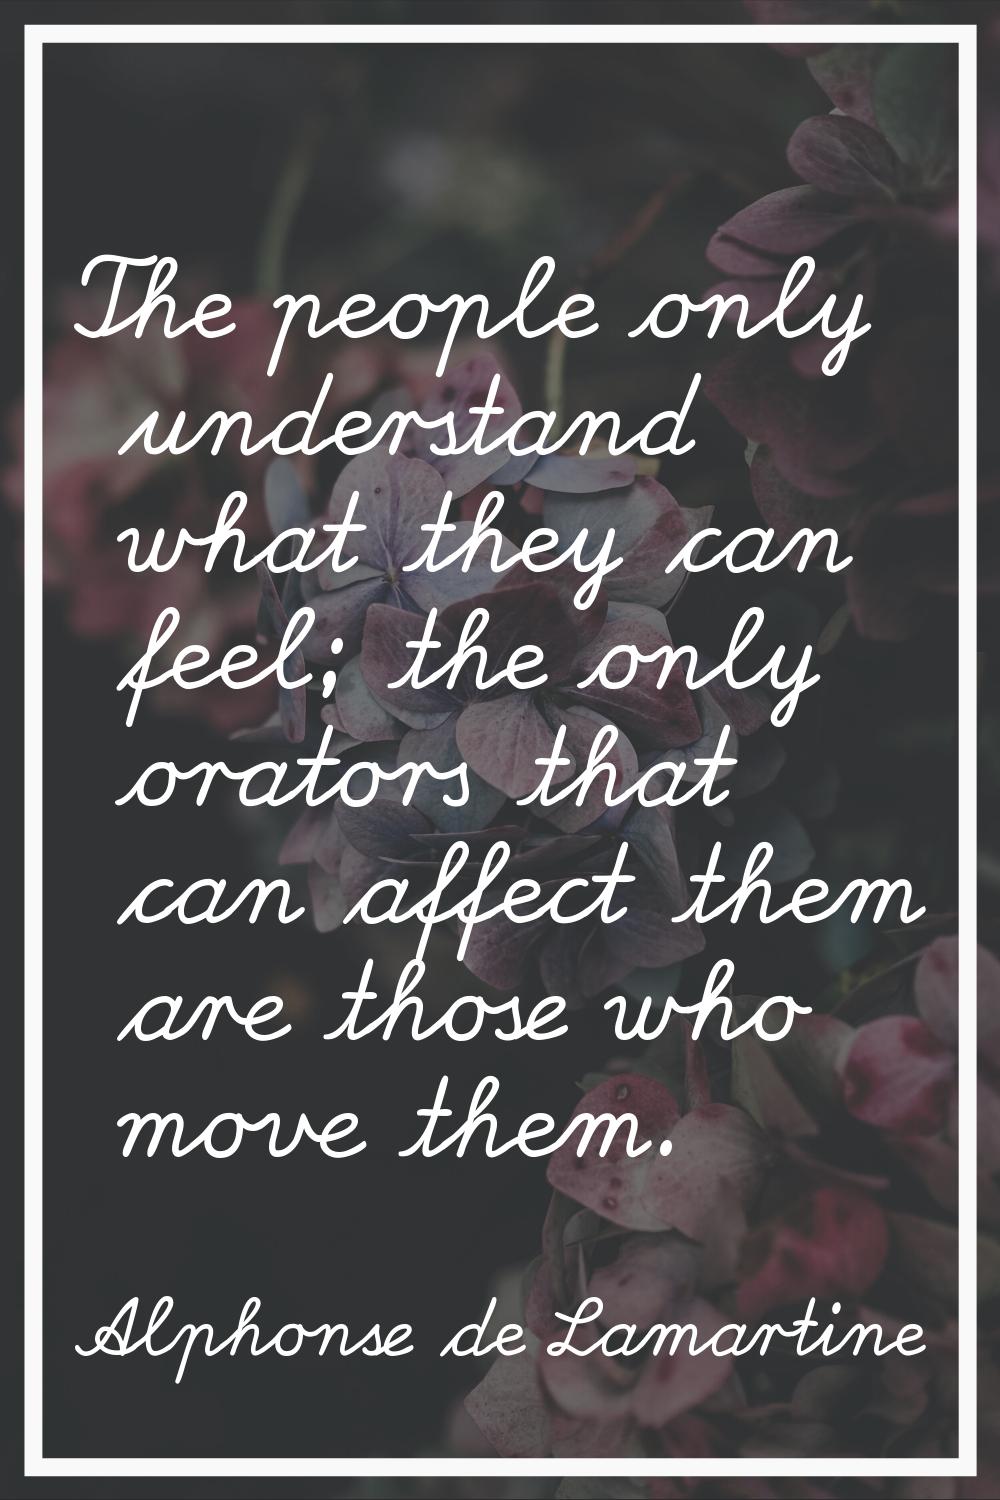 The people only understand what they can feel; the only orators that can affect them are those who 